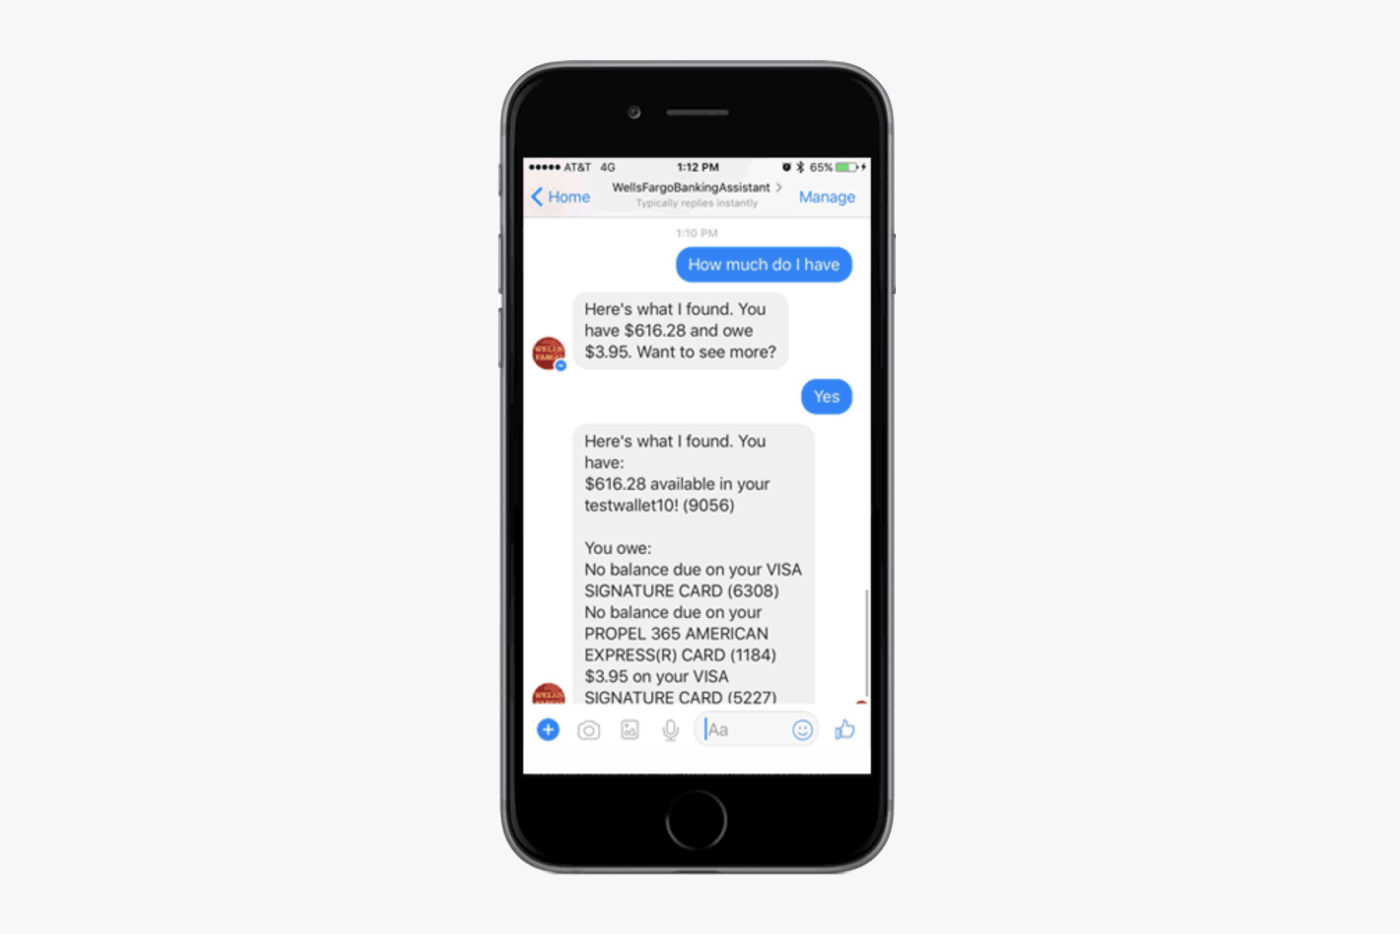 example of Banking and finance with chatbots